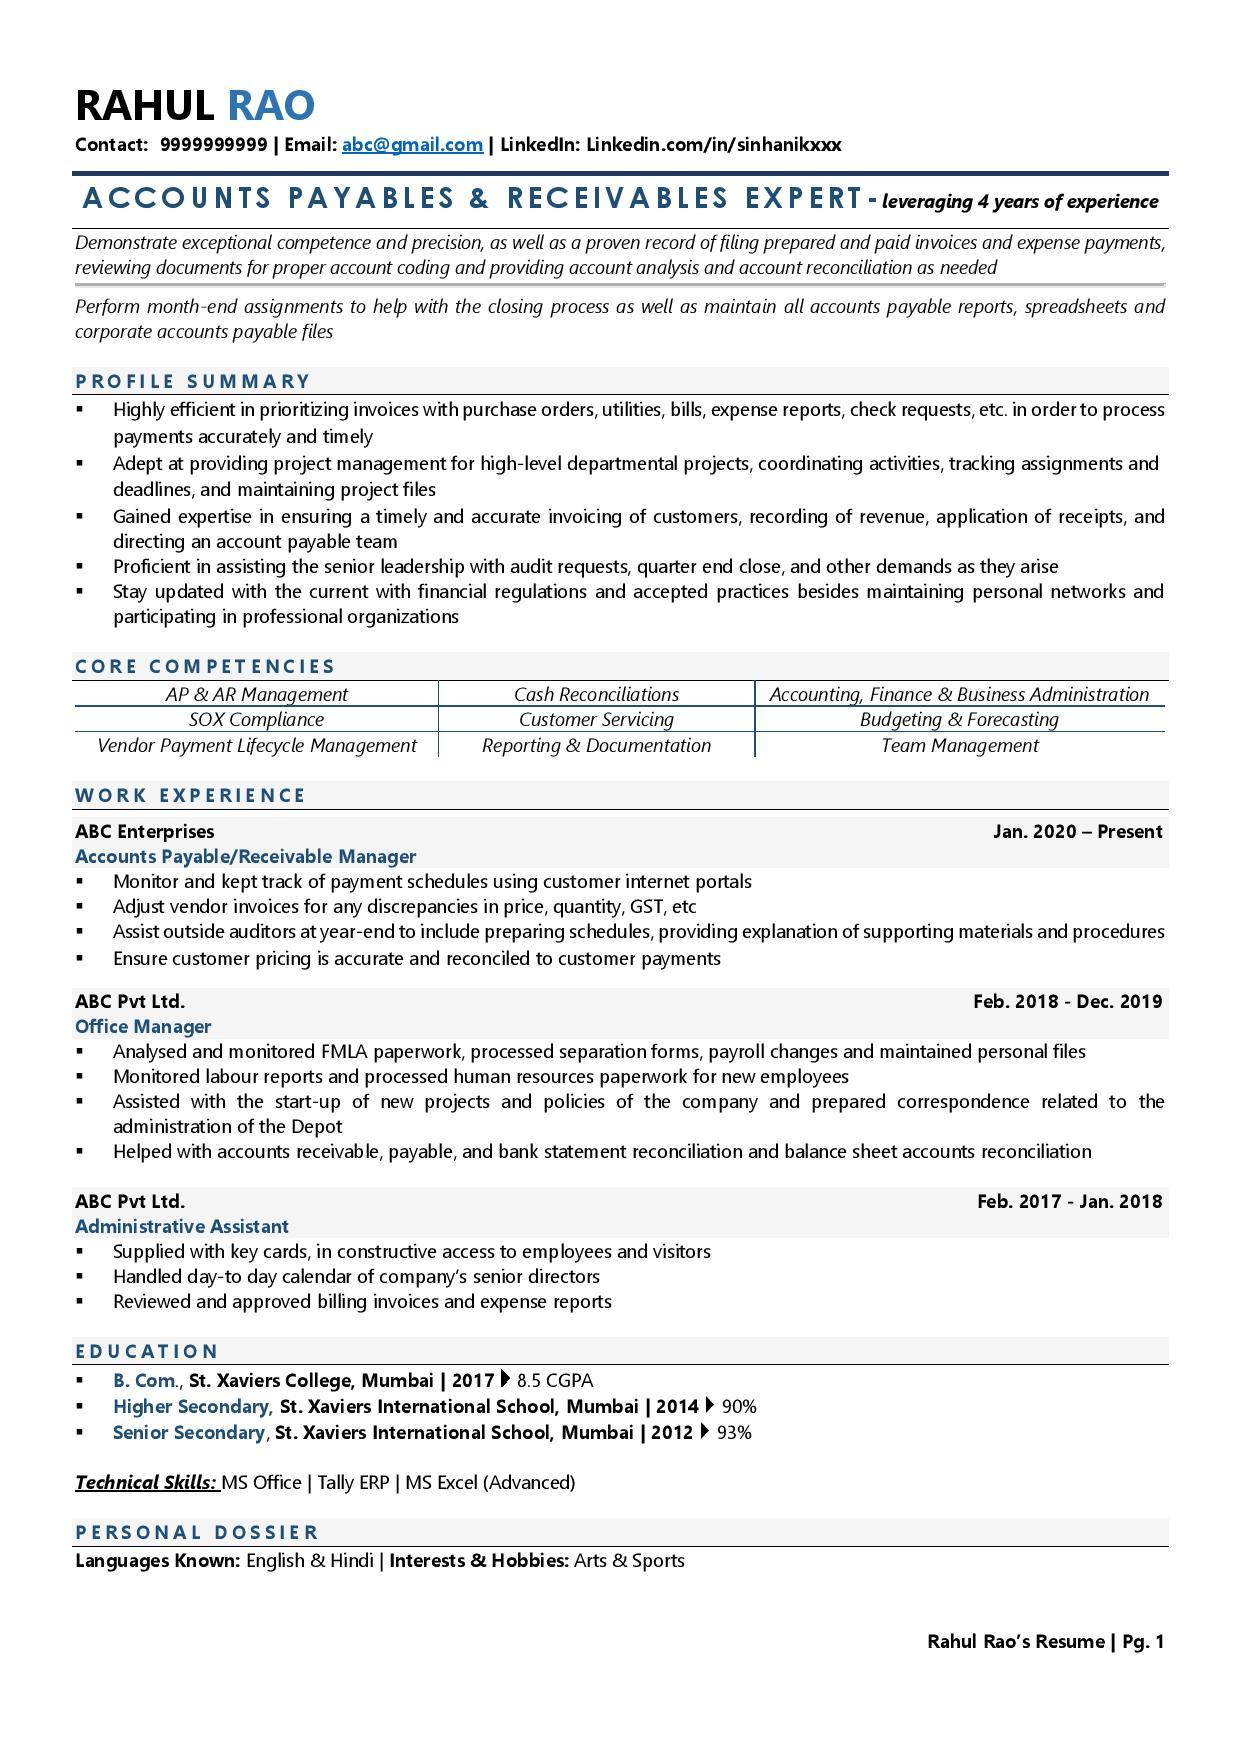 account receivable resume format india